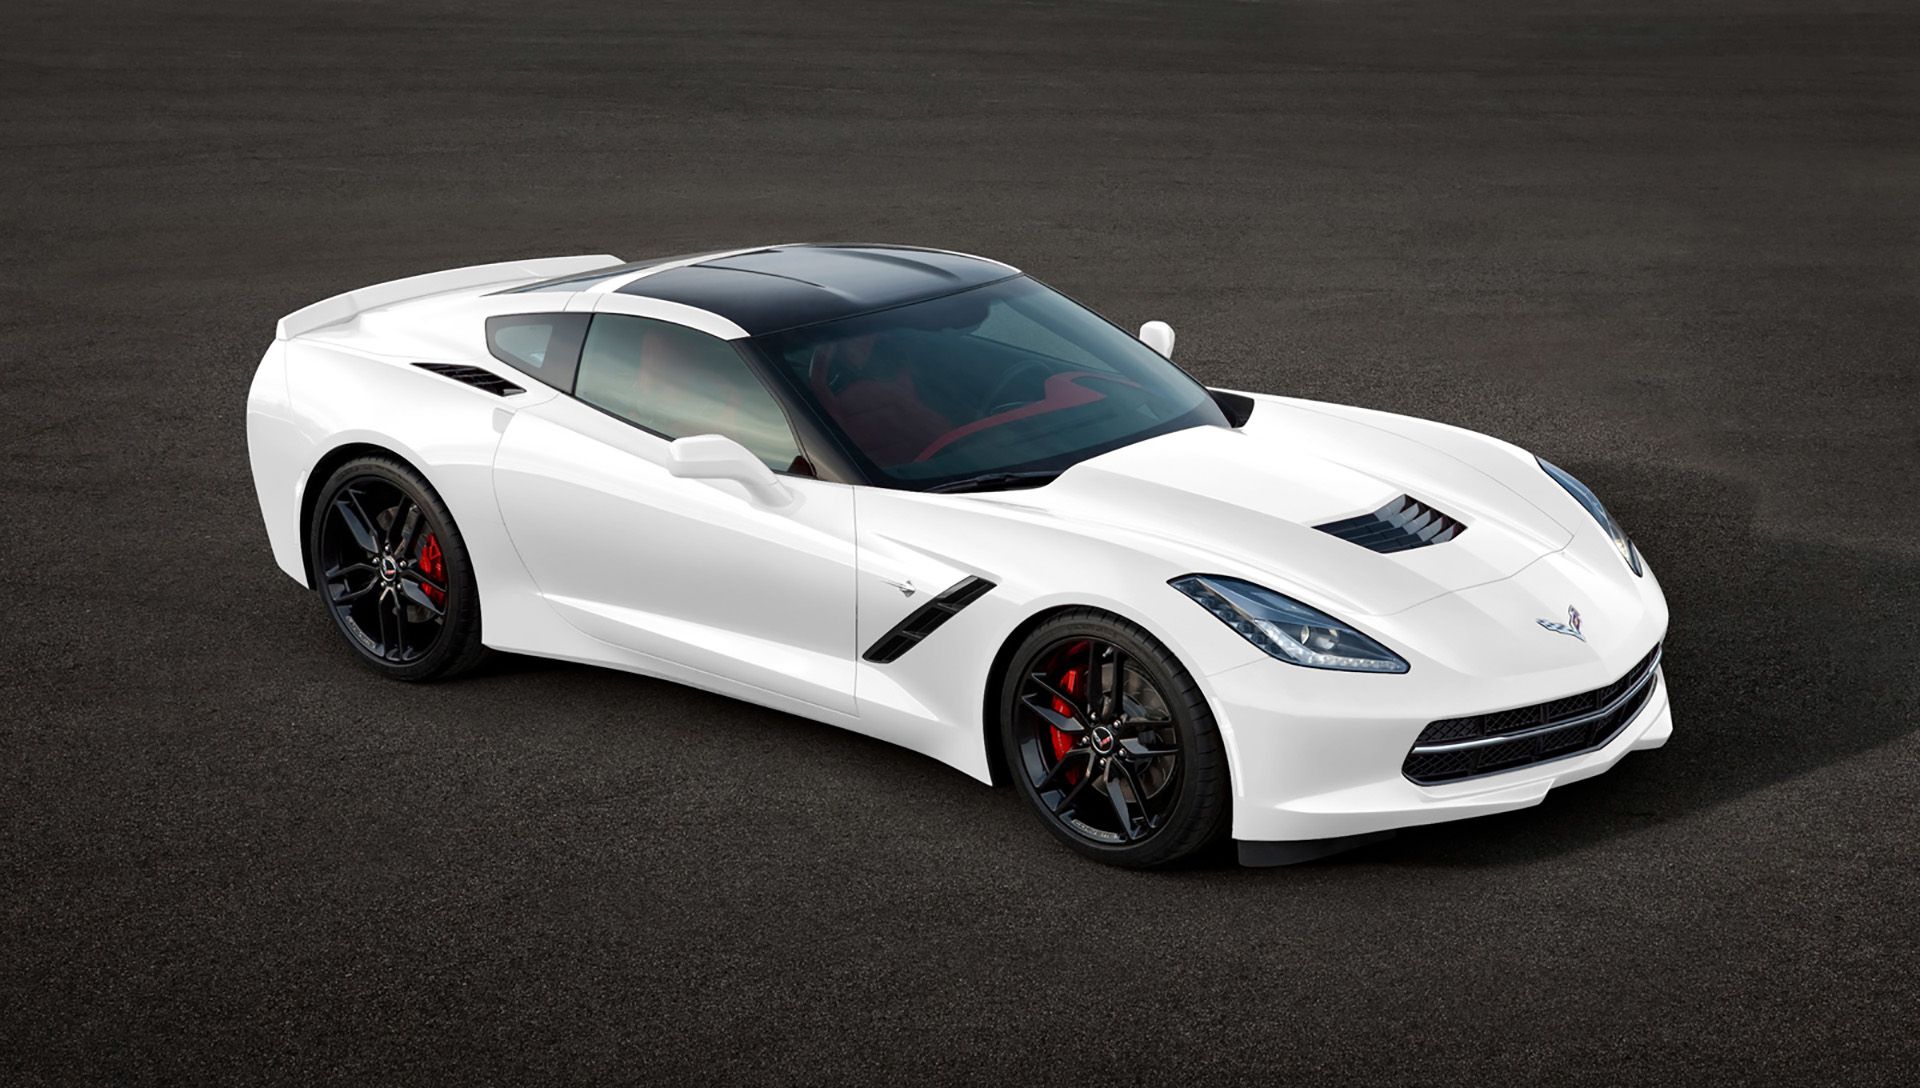 2015 Chevrolet Corvette c7 coupe – pictures, information and specs ...